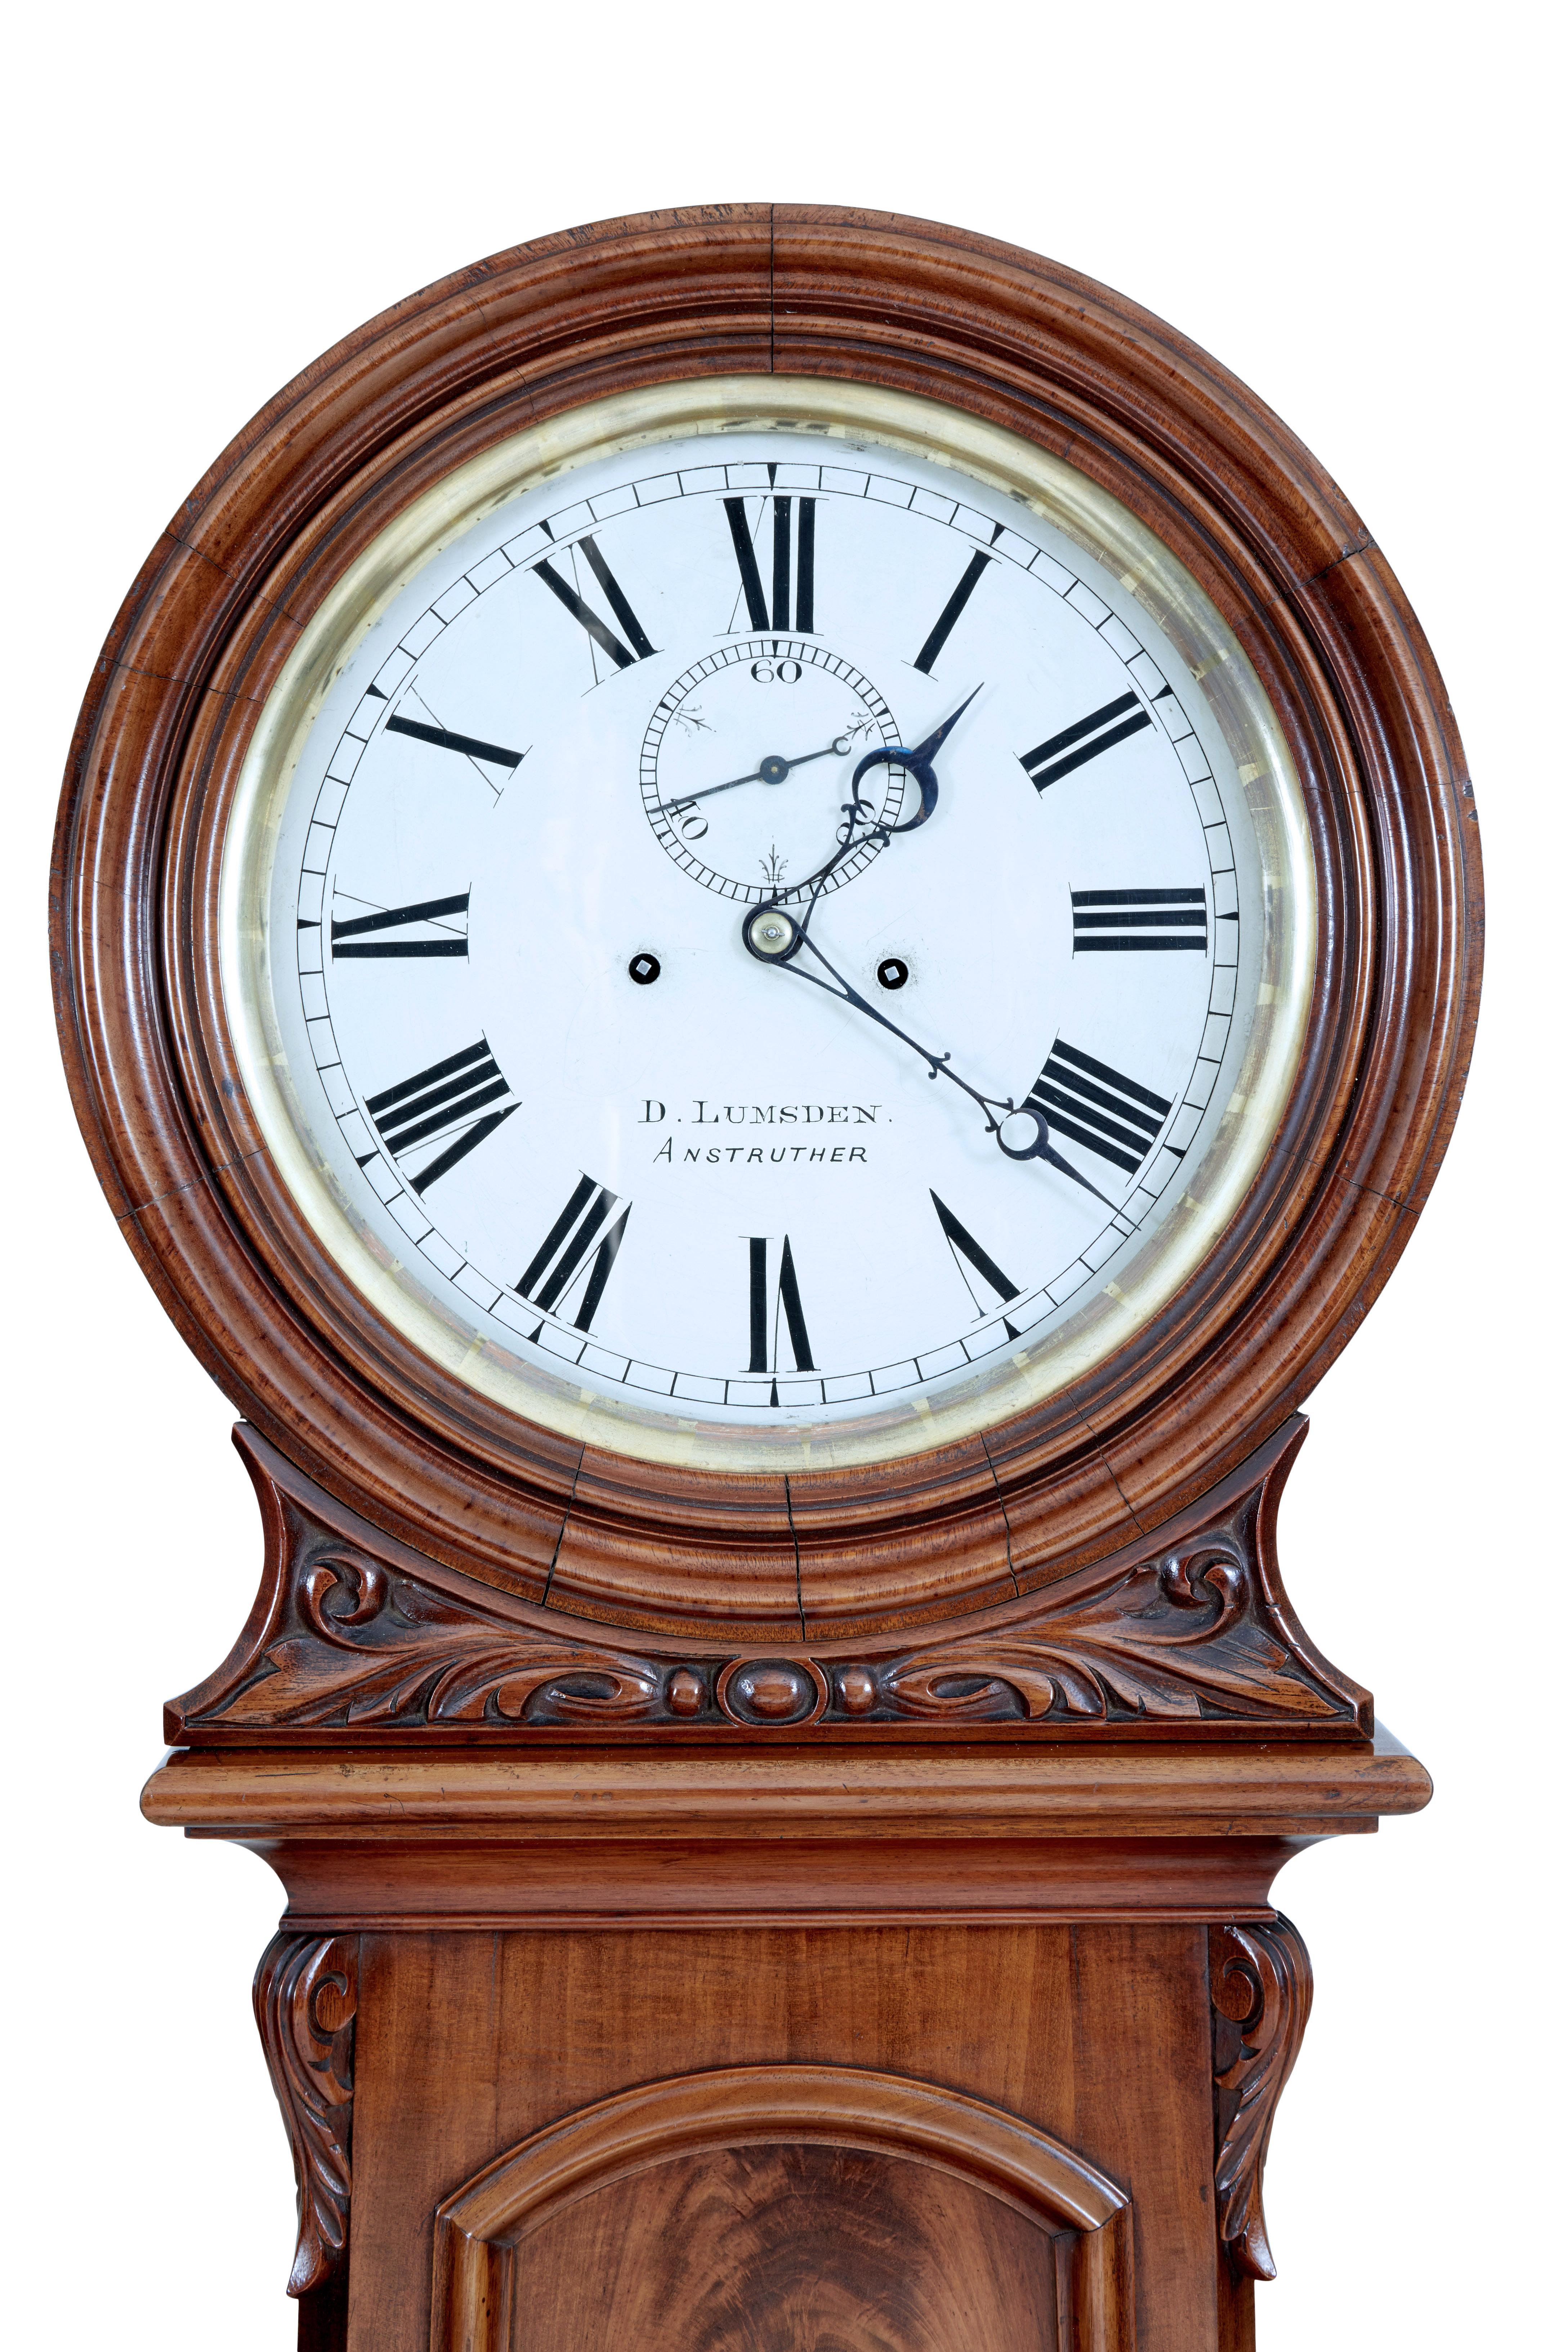 Scottish 19th Century Carved Mahogany Long Case Clock by Lumsden 1